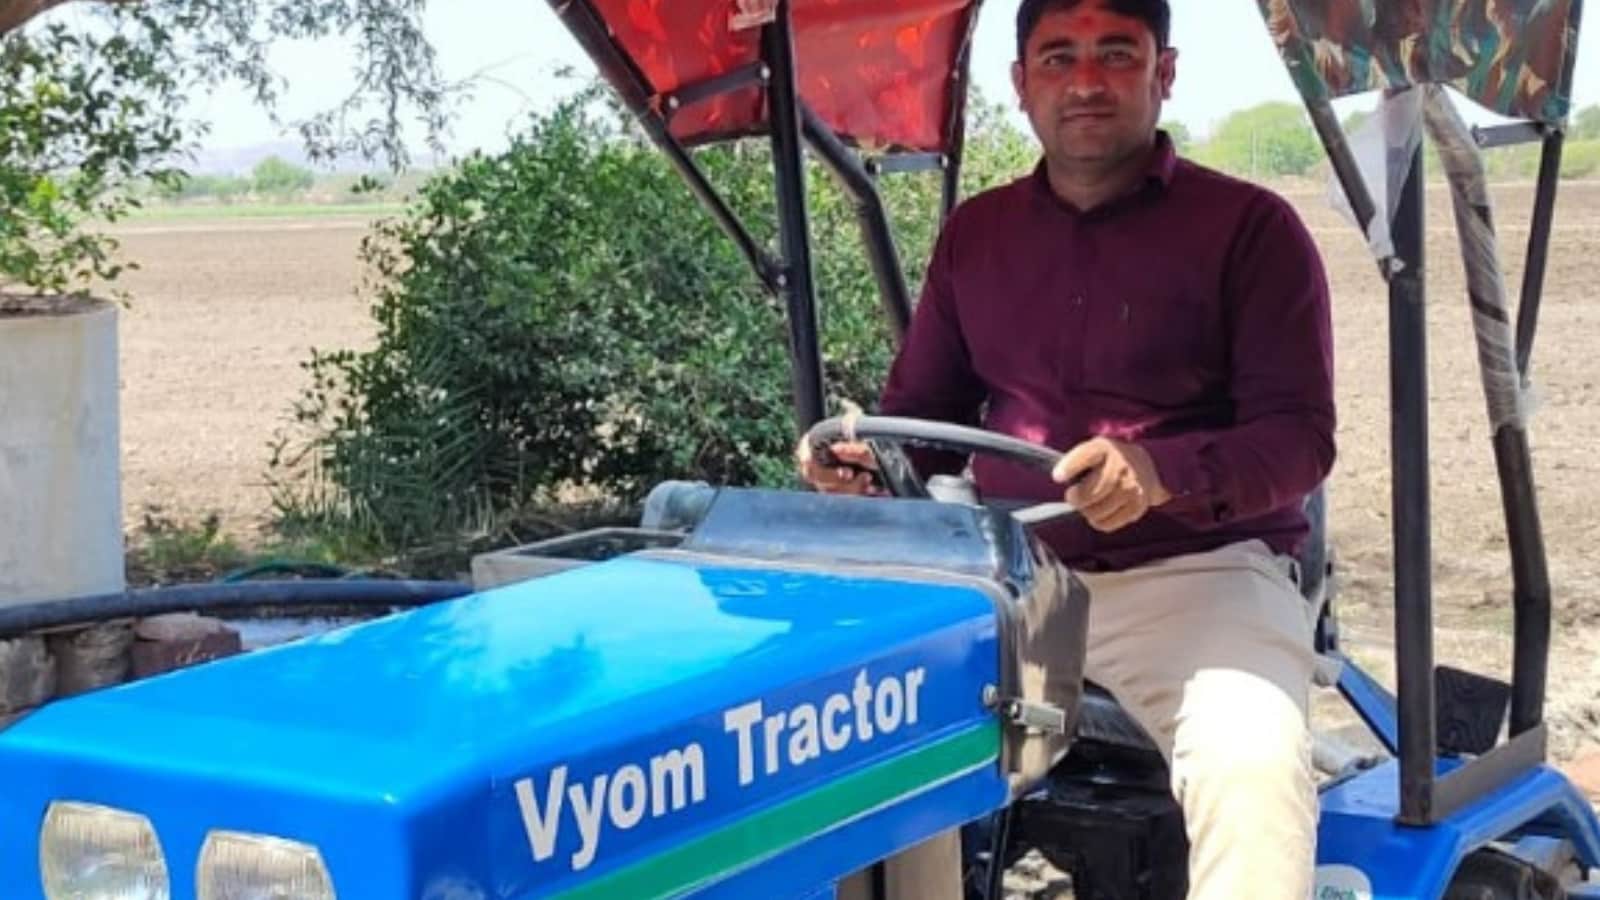 Gujarat Farmer Builds Battery-run 'Vyom' Tractor Amid Rising Fuel Prices